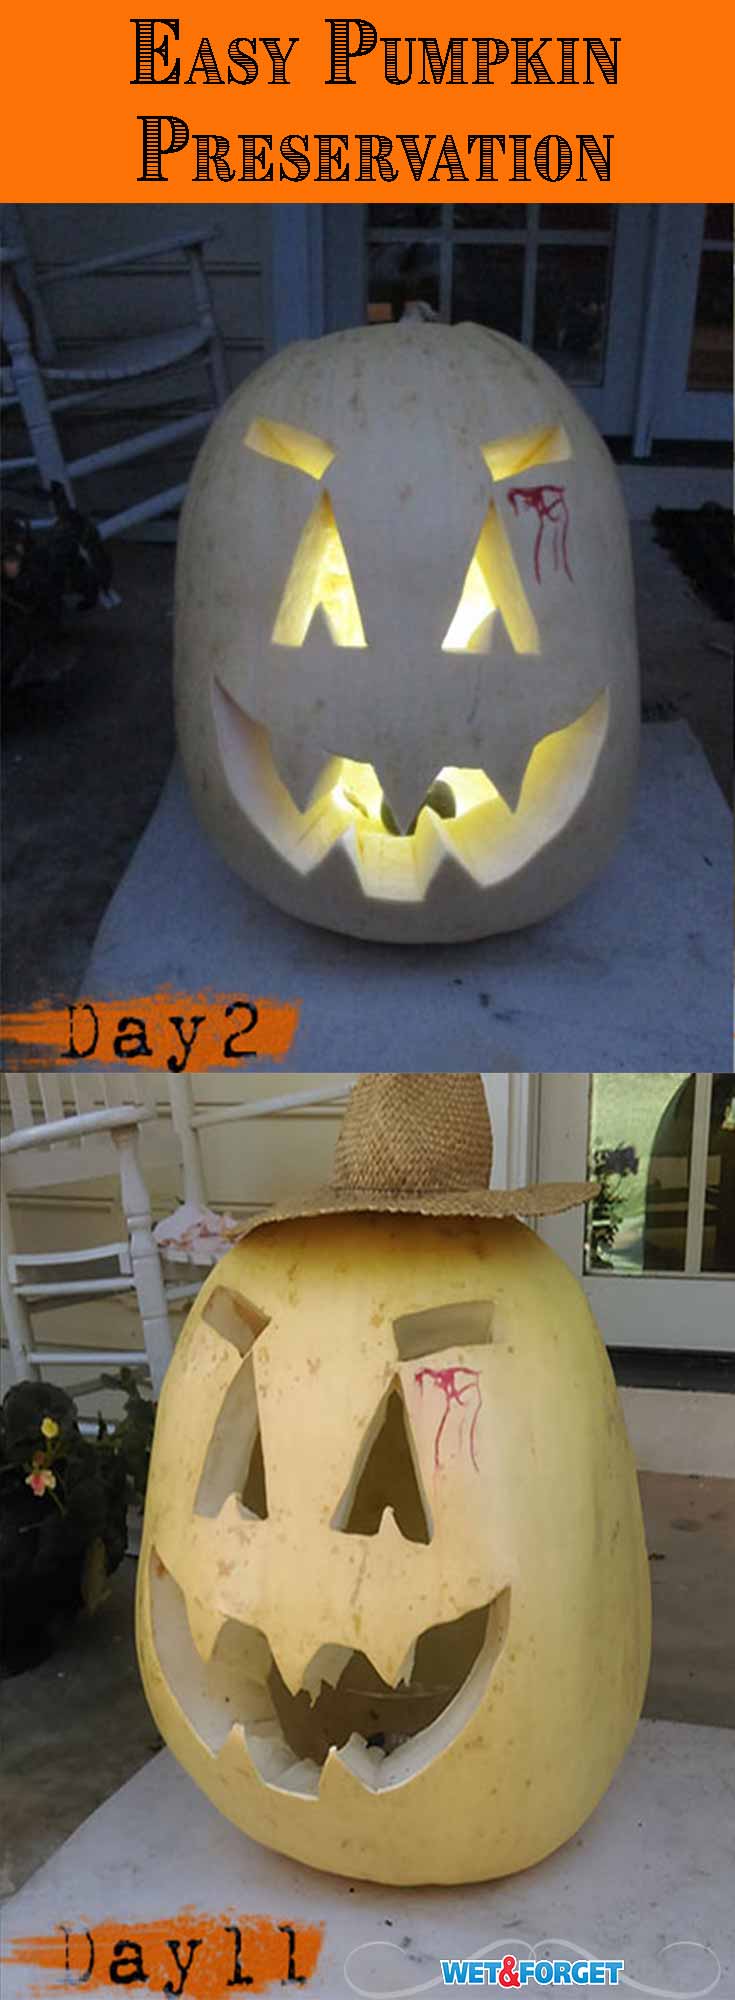 Use this 1 step process to keep your carved pumpkins for up to a month! 